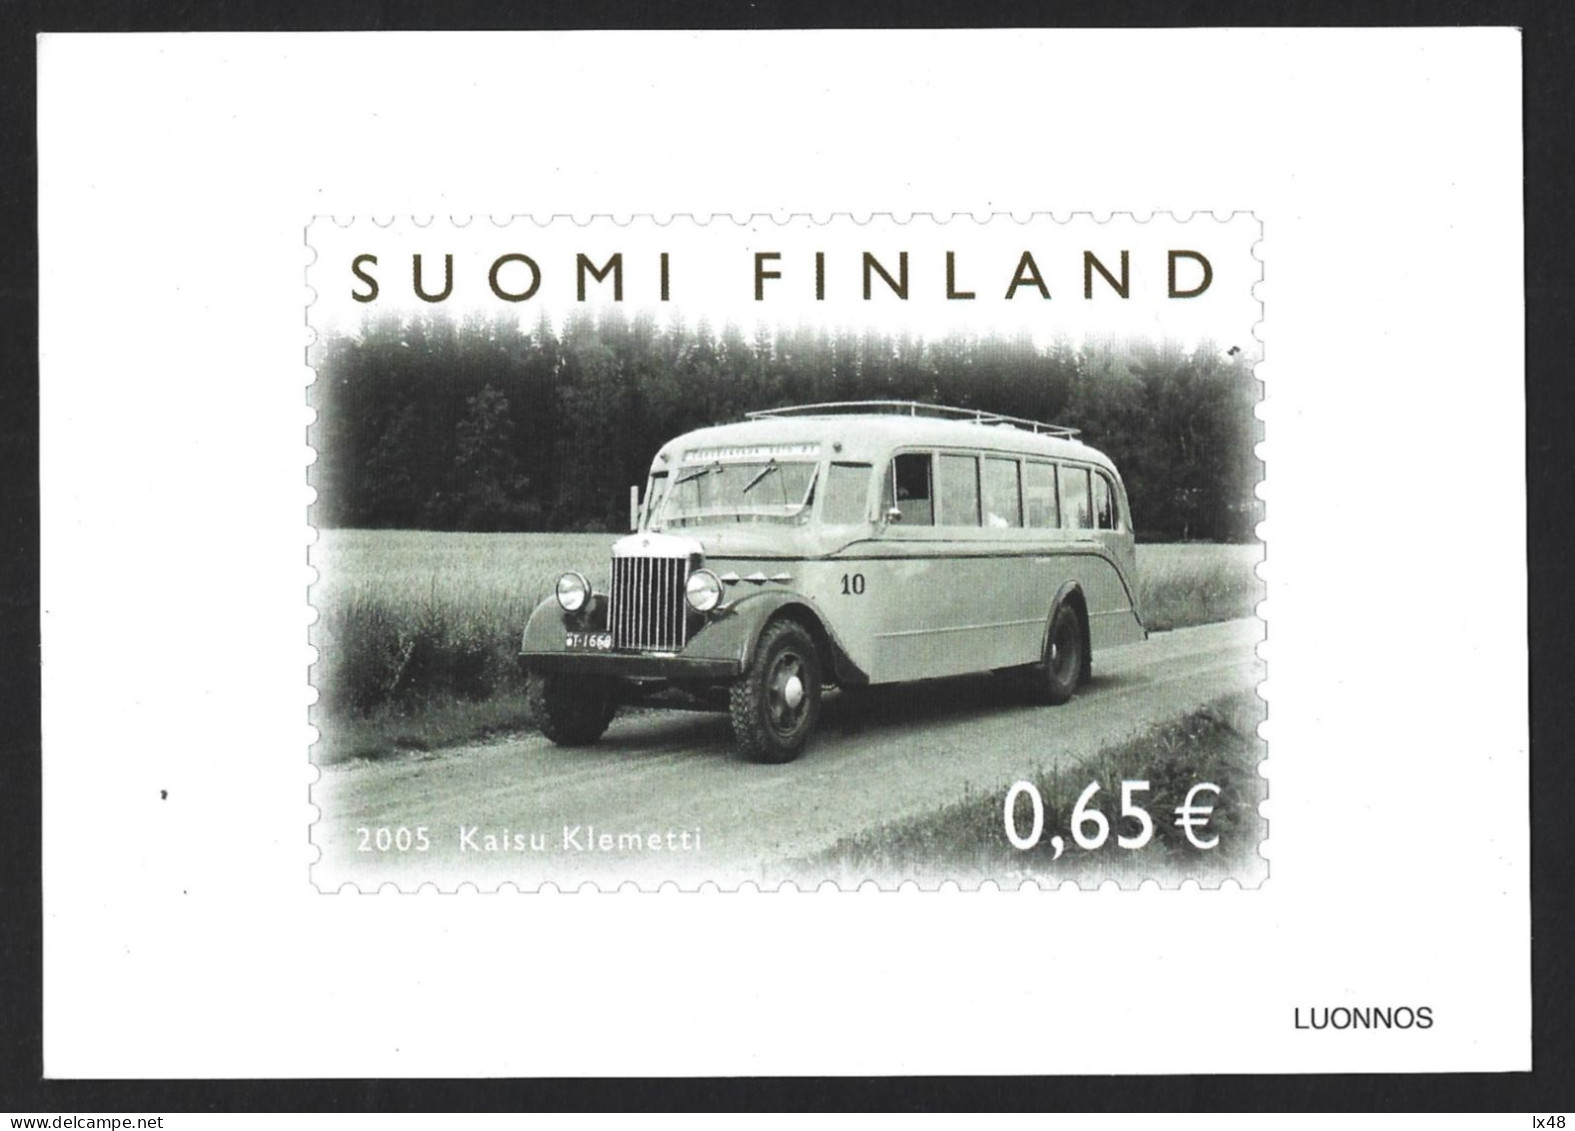 Black Photo Of The €0.65 Stamp From Finland With An Old Mercedes Passenger Car, Sent To The Press Before The Launch. Rar - Bus